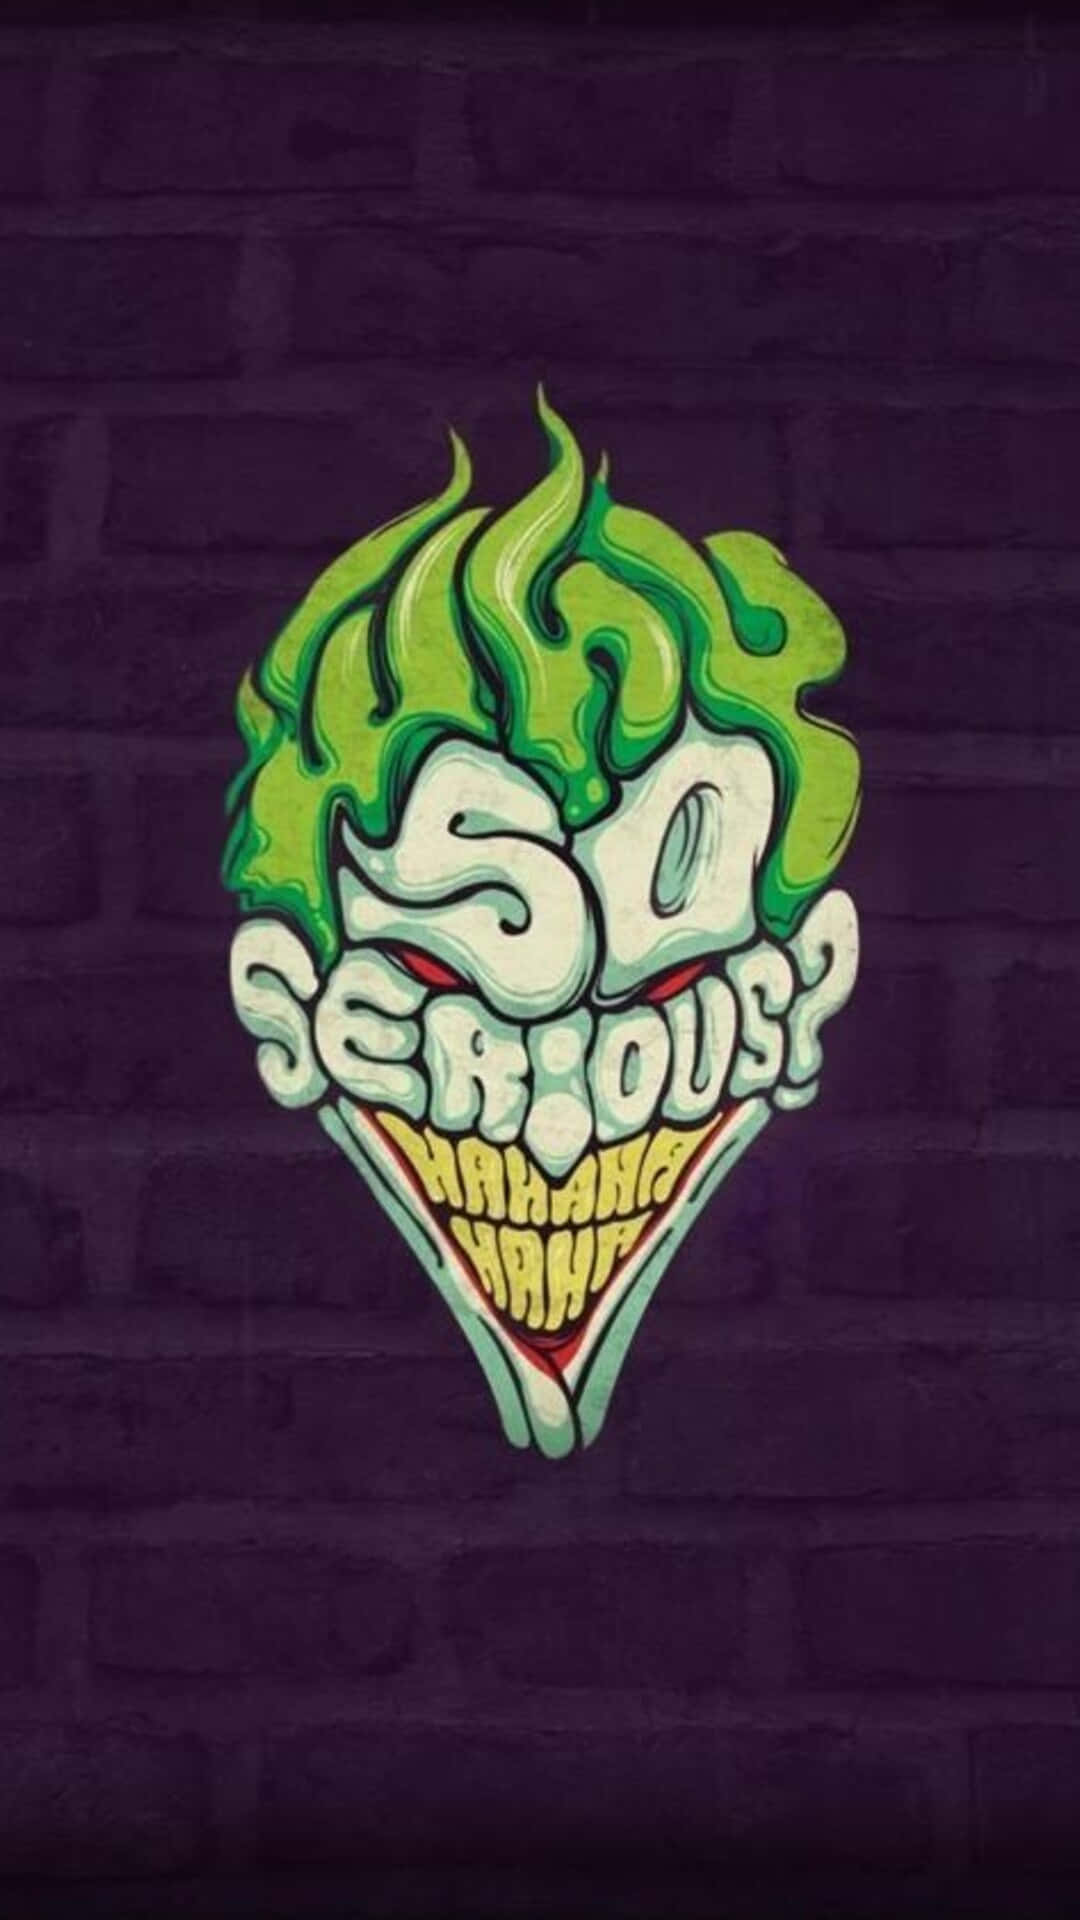 Why So Serious Morphed To Joker's Face Wallpaper